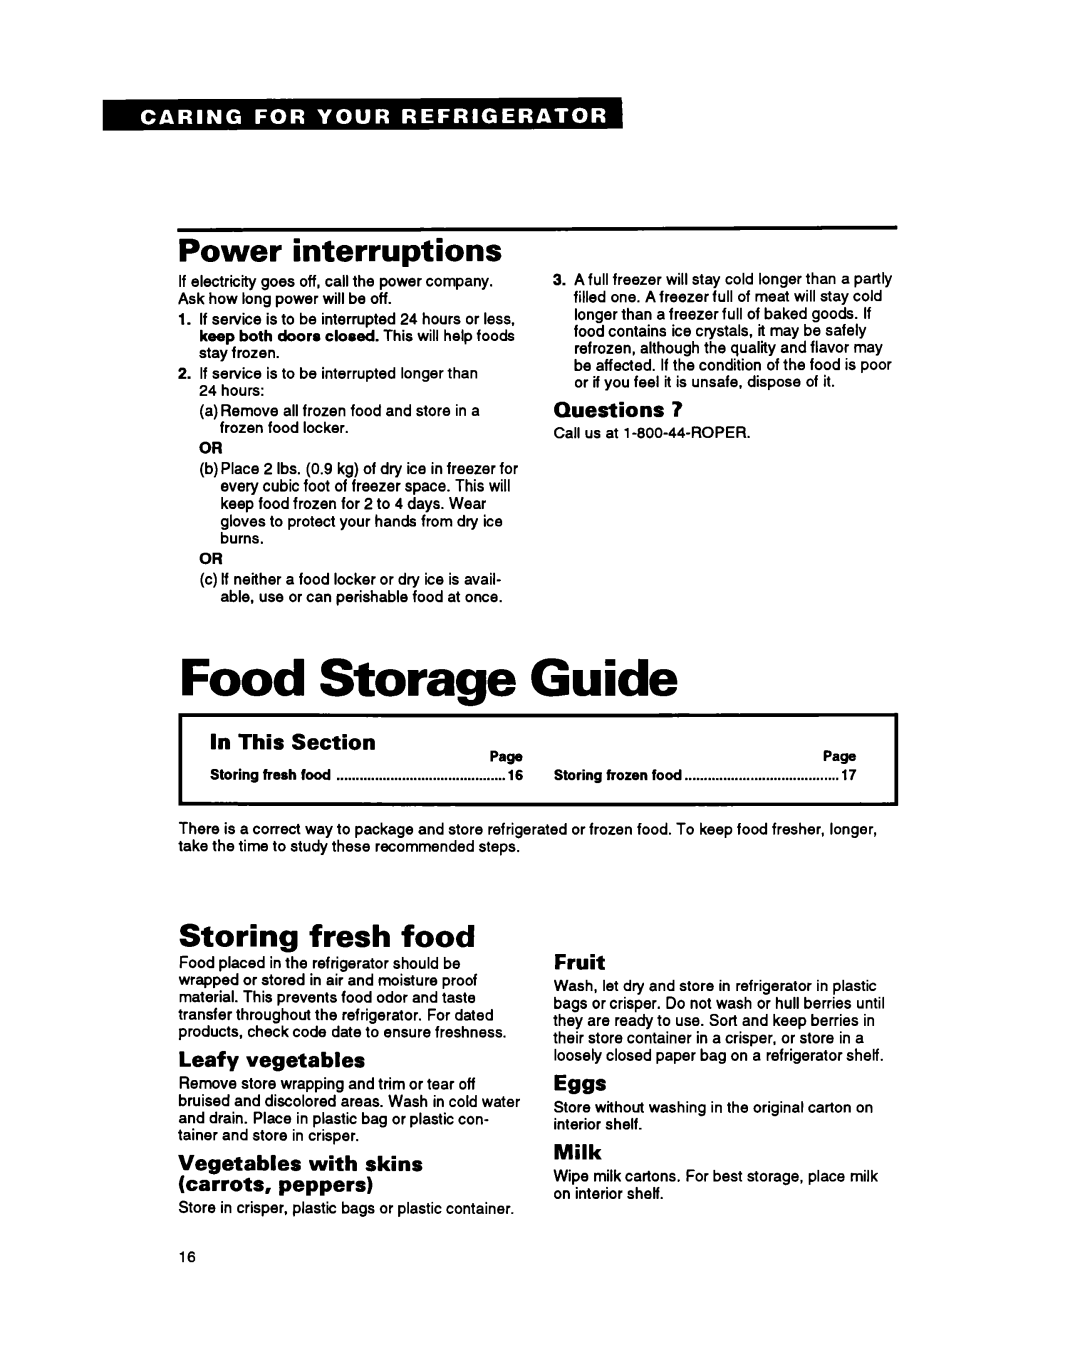 Whirlpool RT25BK Food Storage Guide, Power interruptions, Storing fresh food, Questions, In This Section PawPage, Fruit 